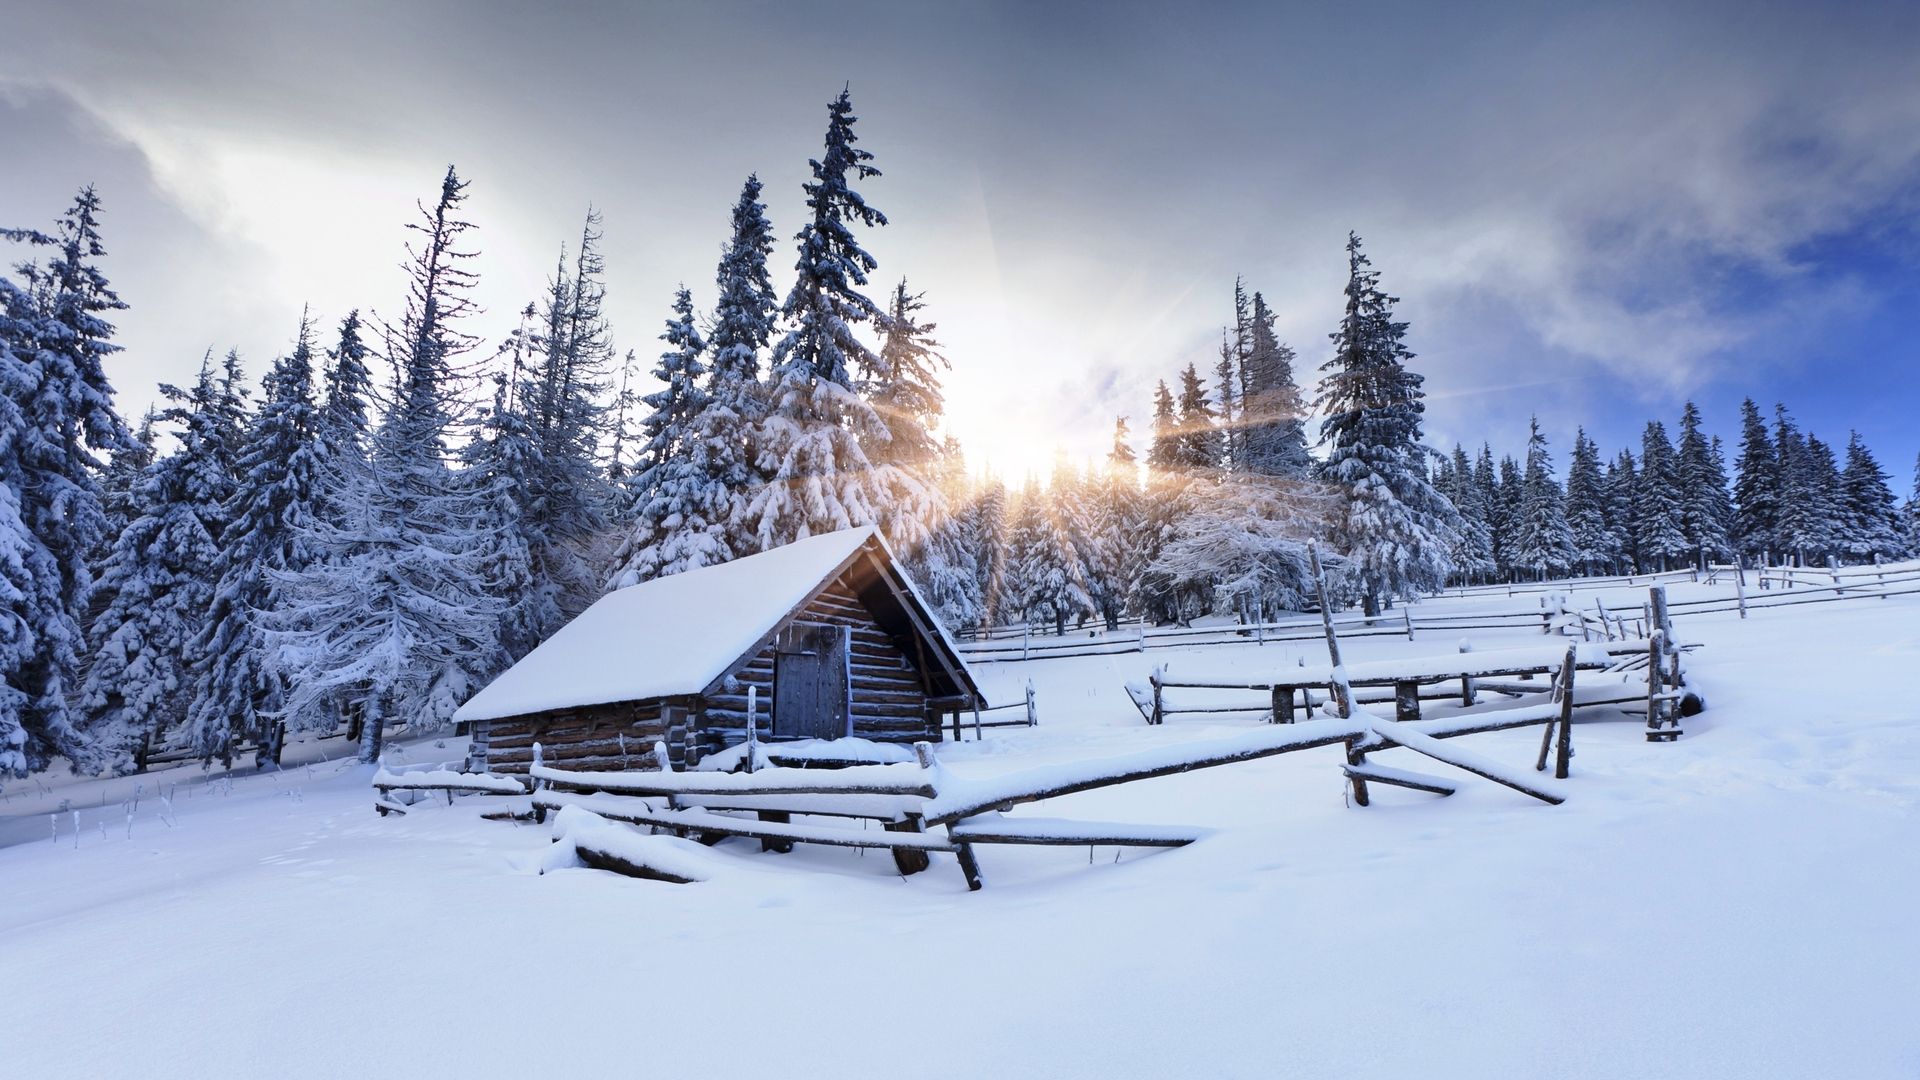 Winter Wallpaper High Quality Download Free Mountain Image Free Wallpaper & Background Download